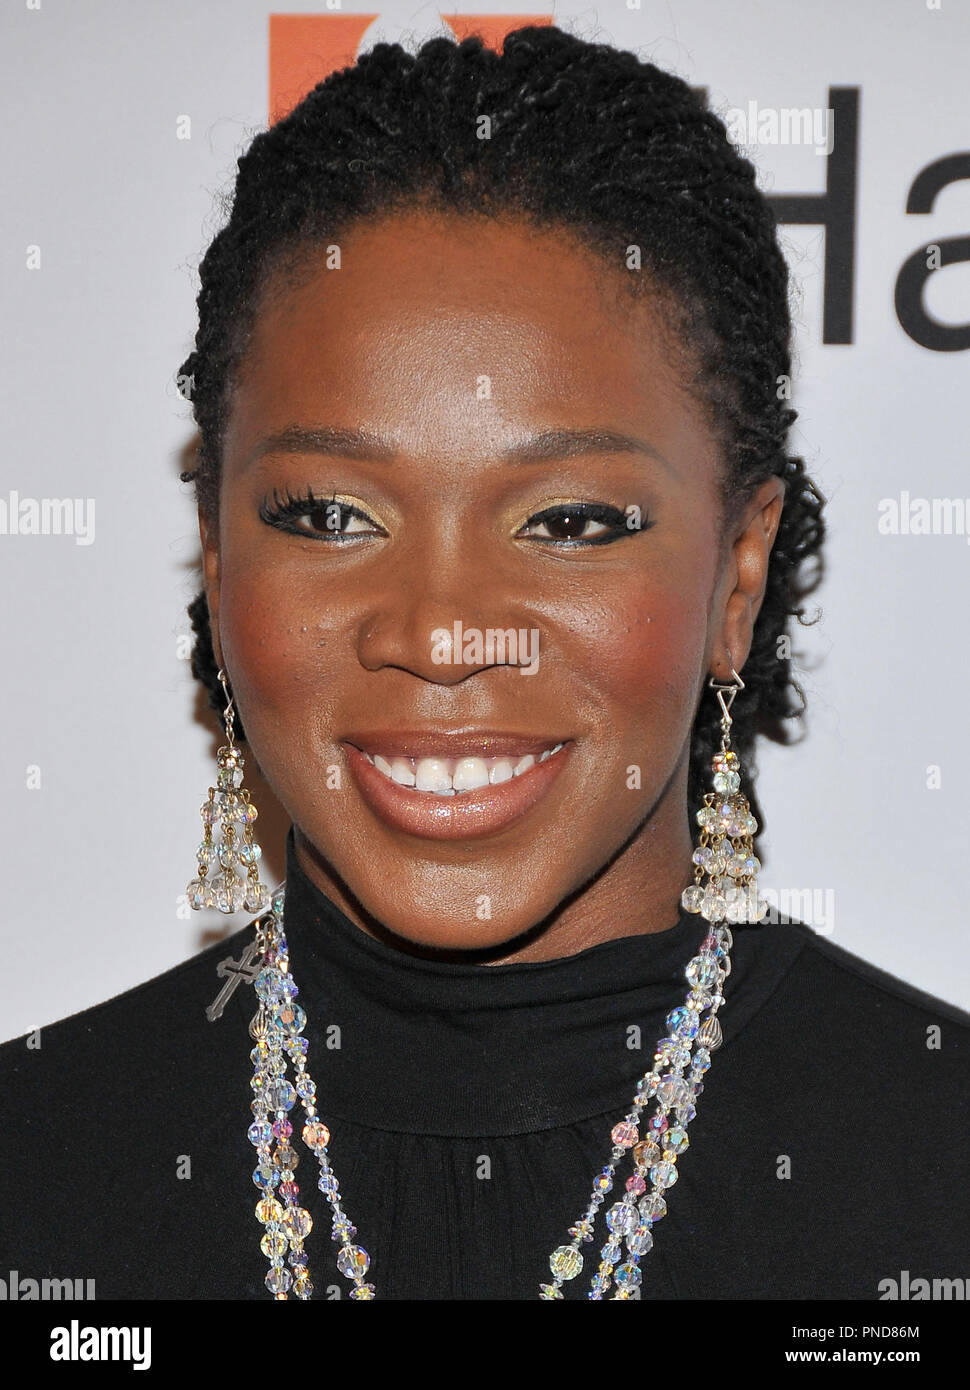 India.Arie at The Recording Academy and Clive Davis 2010 Pre-Grammy Gala held at the Beverly Hilton Hotel in Beverly Hills, CA. The event took place on Saturday, January 30, 2010. Photo by PRPP Pacific Rim Photo Press. /PictureLux File Reference # India Arie 13010 1PLX   For Editorial Use Only -  All Rights Reserved Stock Photo